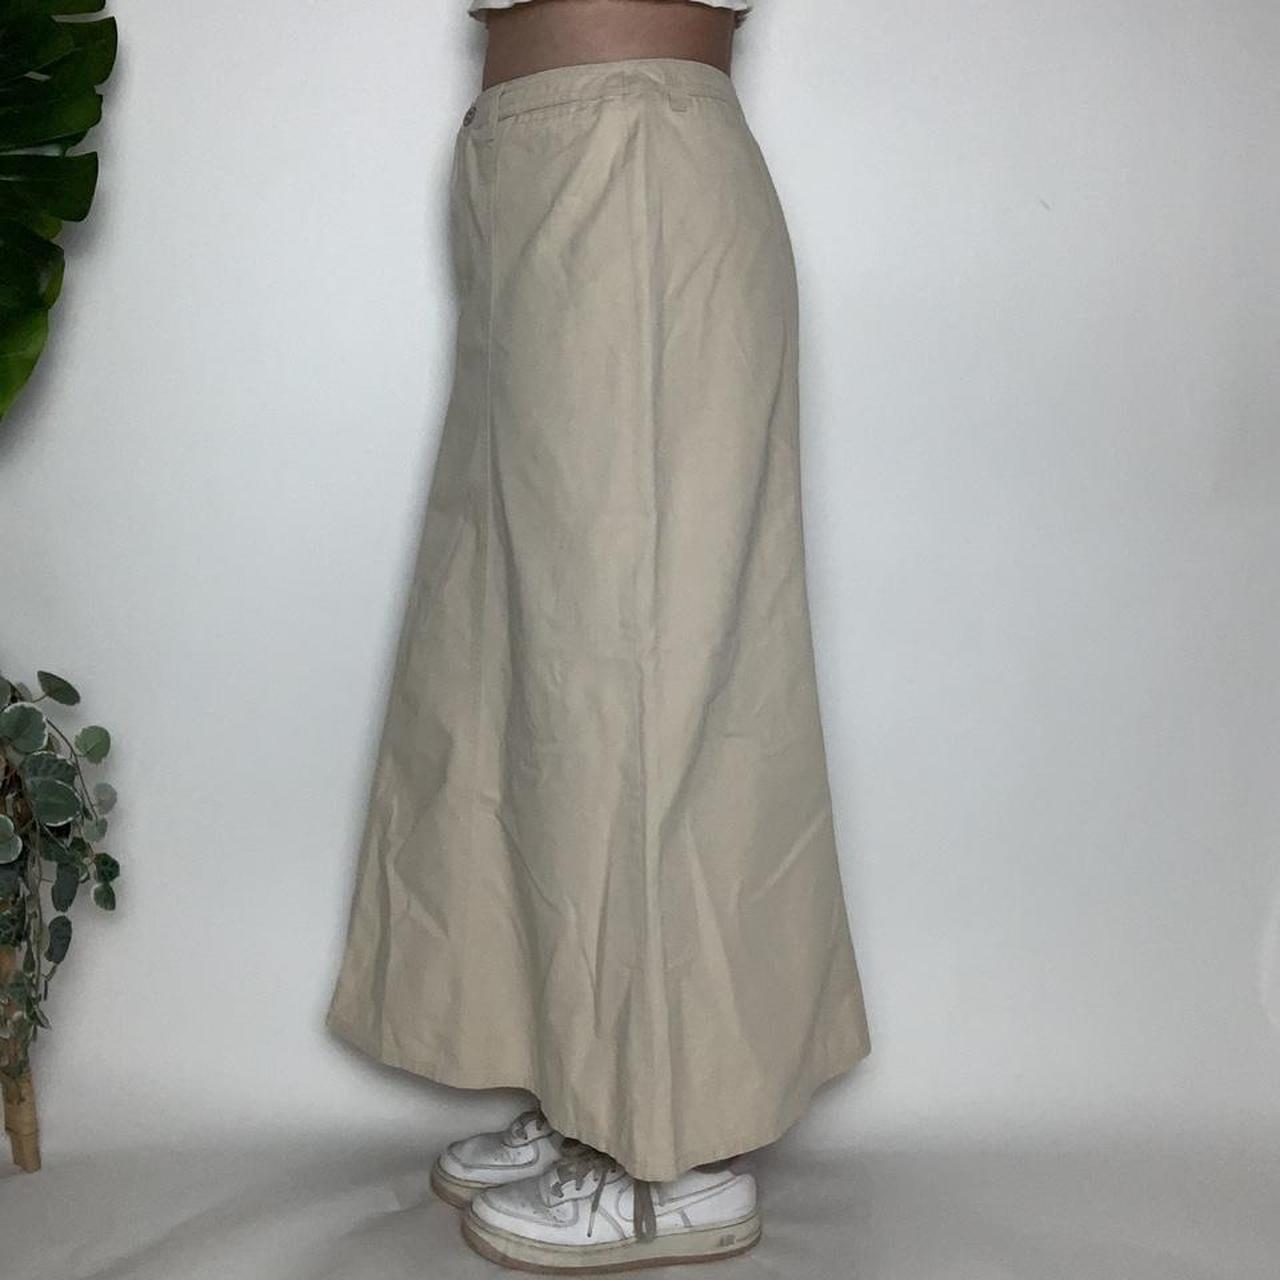 HOLIDAY HEATWAVE 🌴 True vintage late 90’s tan cargo style maxi skirt